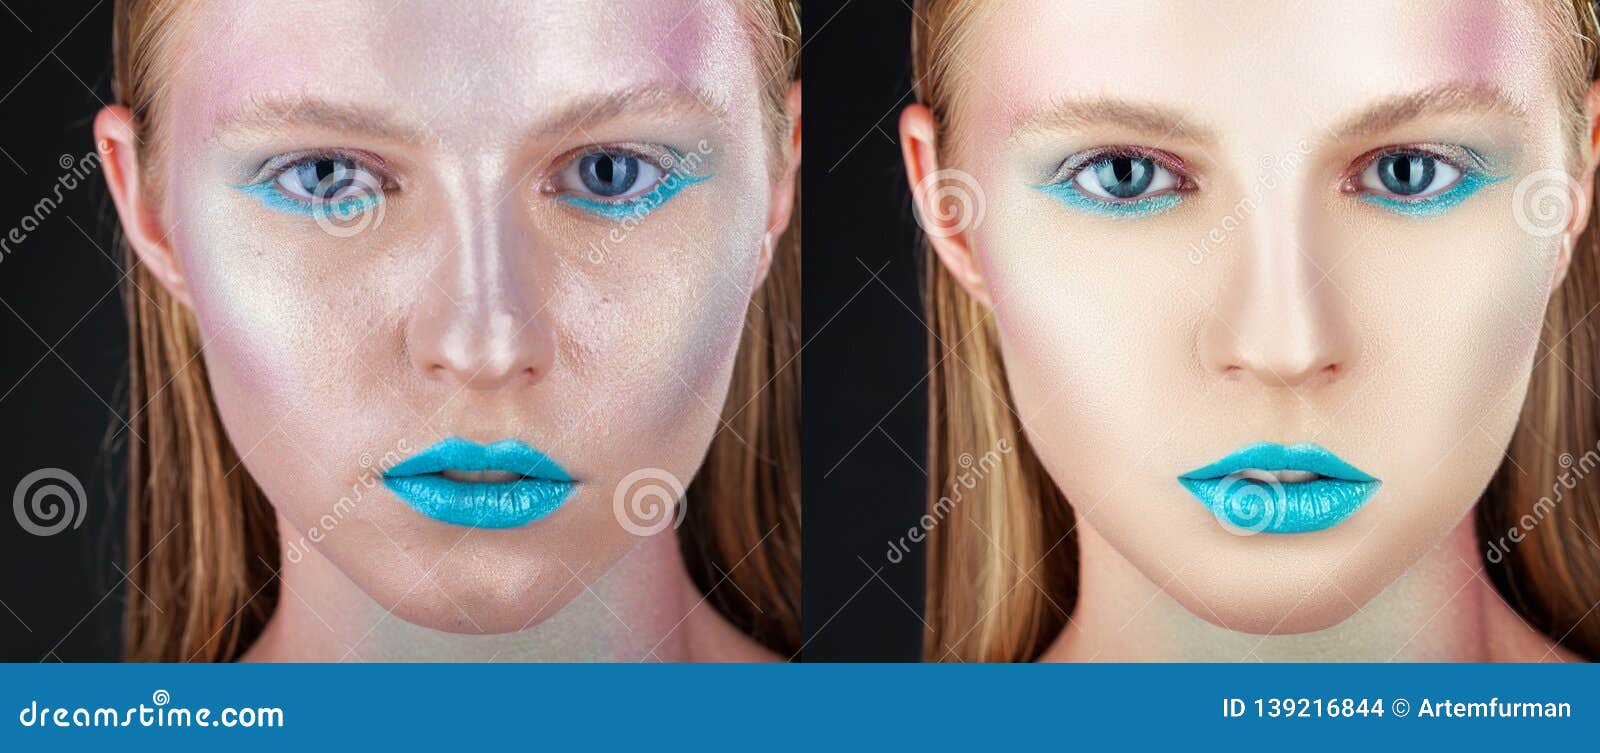 before and after retouch